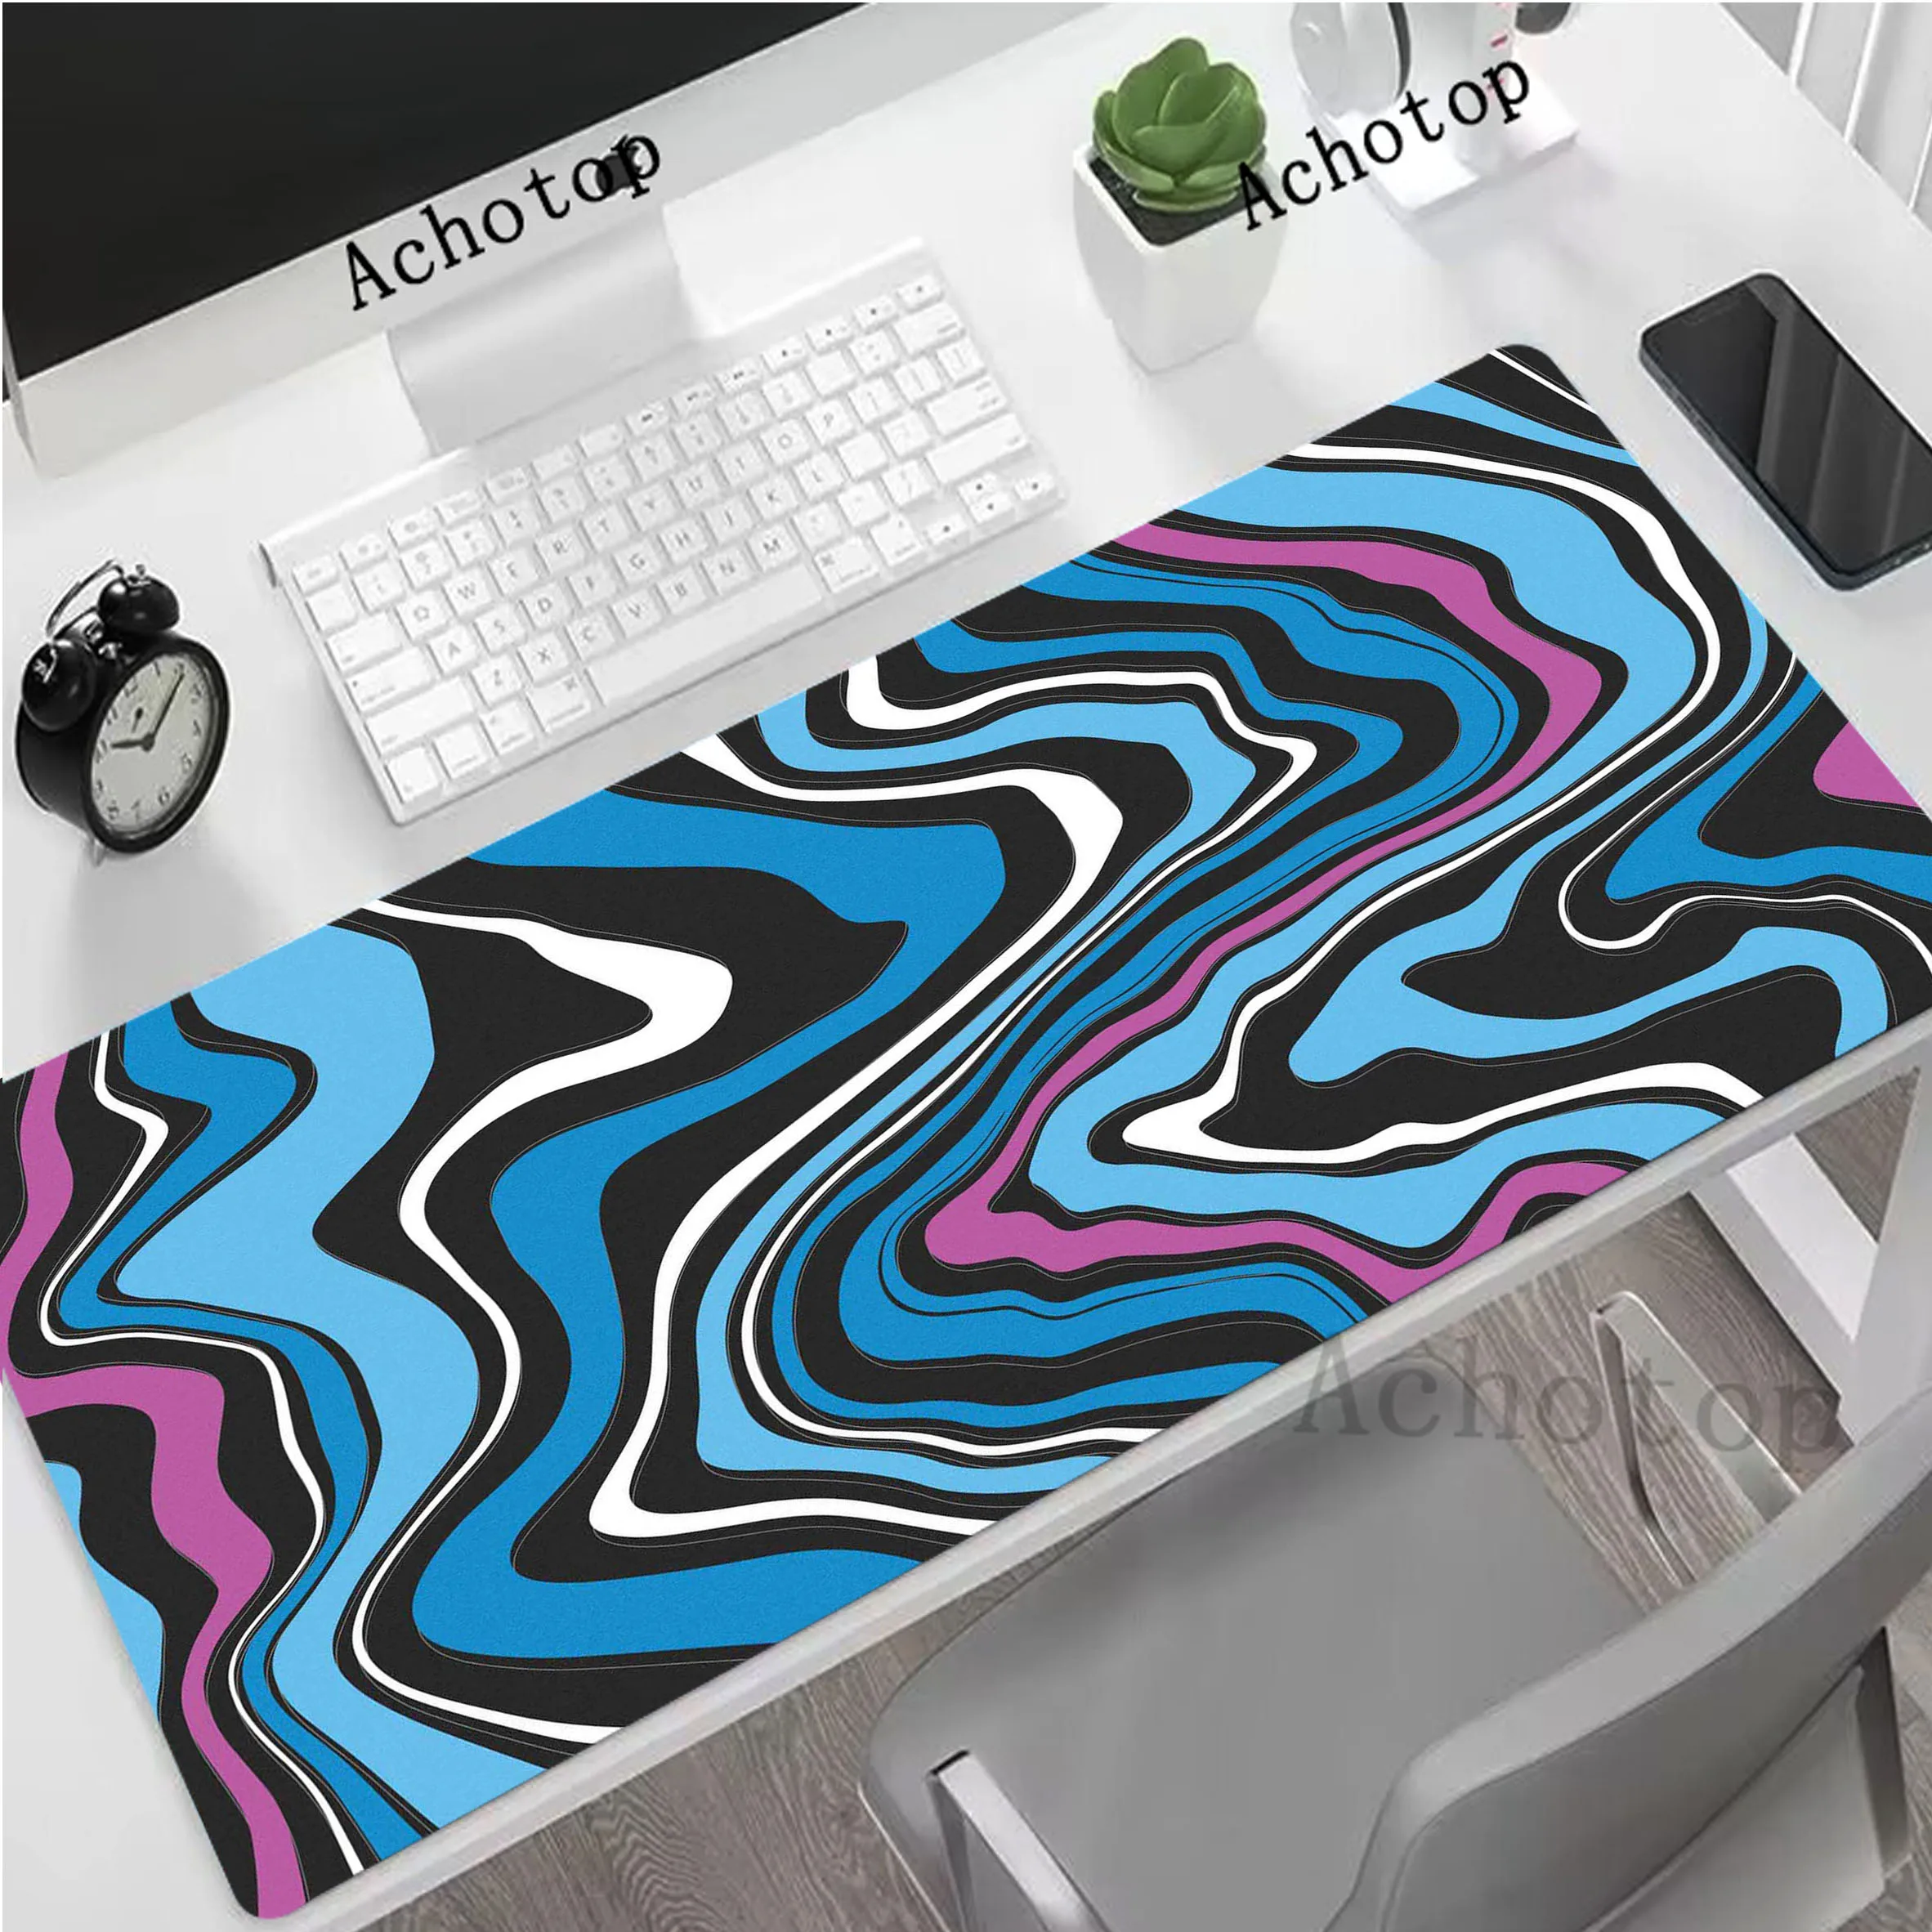 

Strata Liquid Mouse Pad Rubber Gaming Mousemat Large Desk Mat Pc Gamer Accessoires Mousepad Anti-slip Speed Keyboard Pads XXL